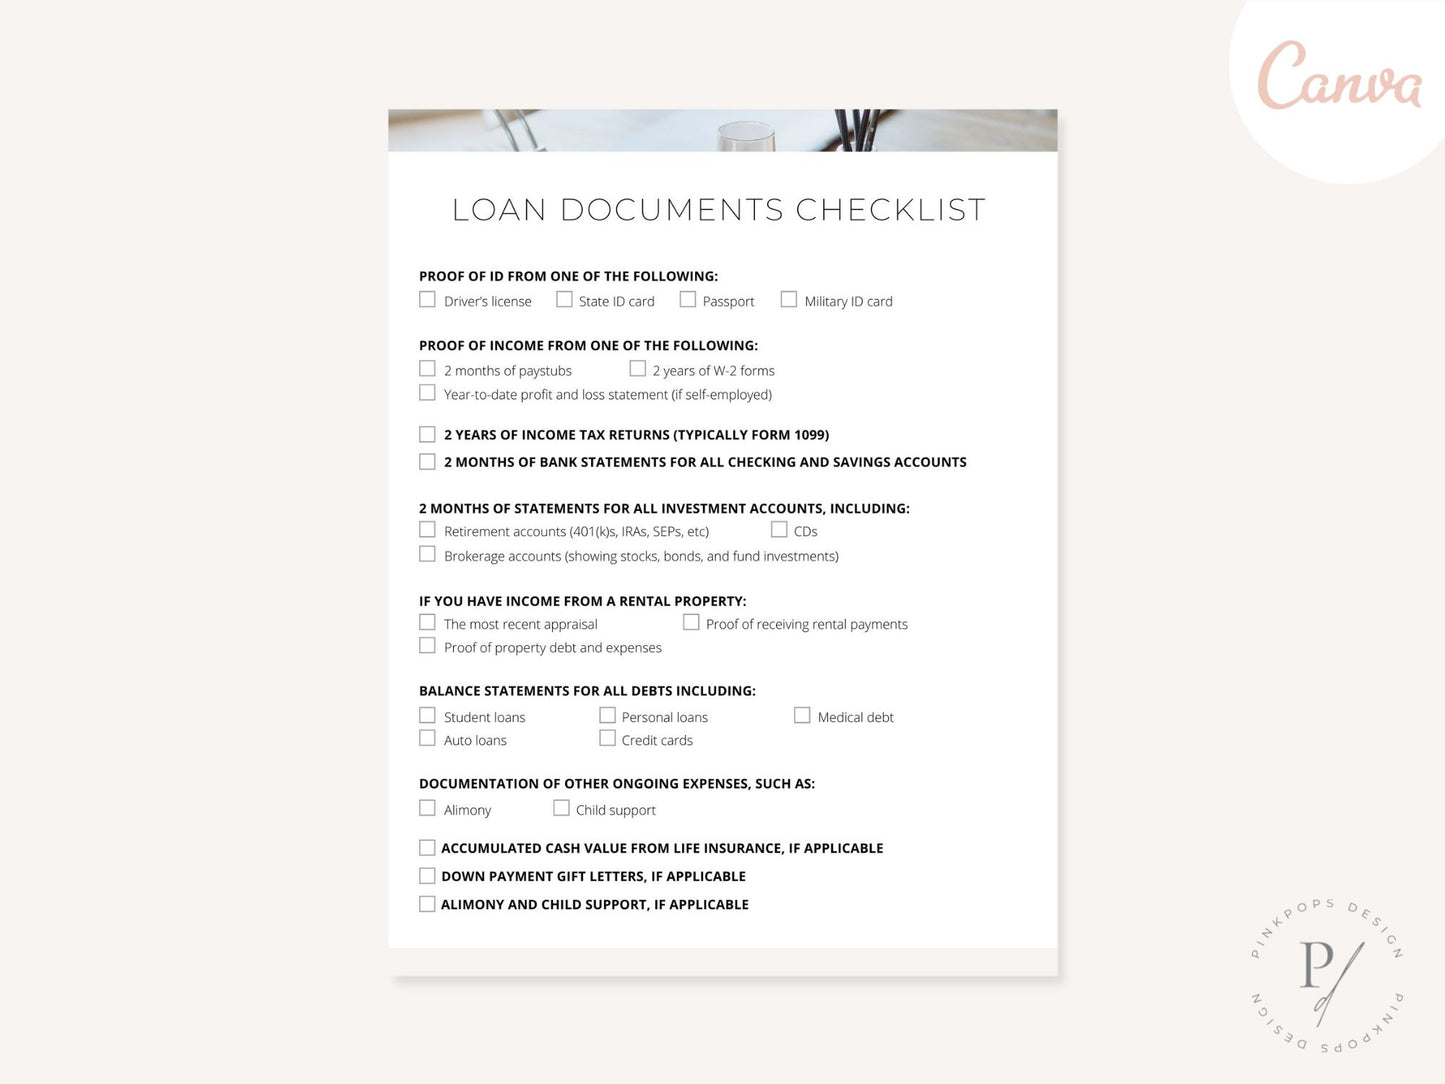 Minimal Loan Documents Checklist - Streamlined toolkit for efficient loan application and financial success.